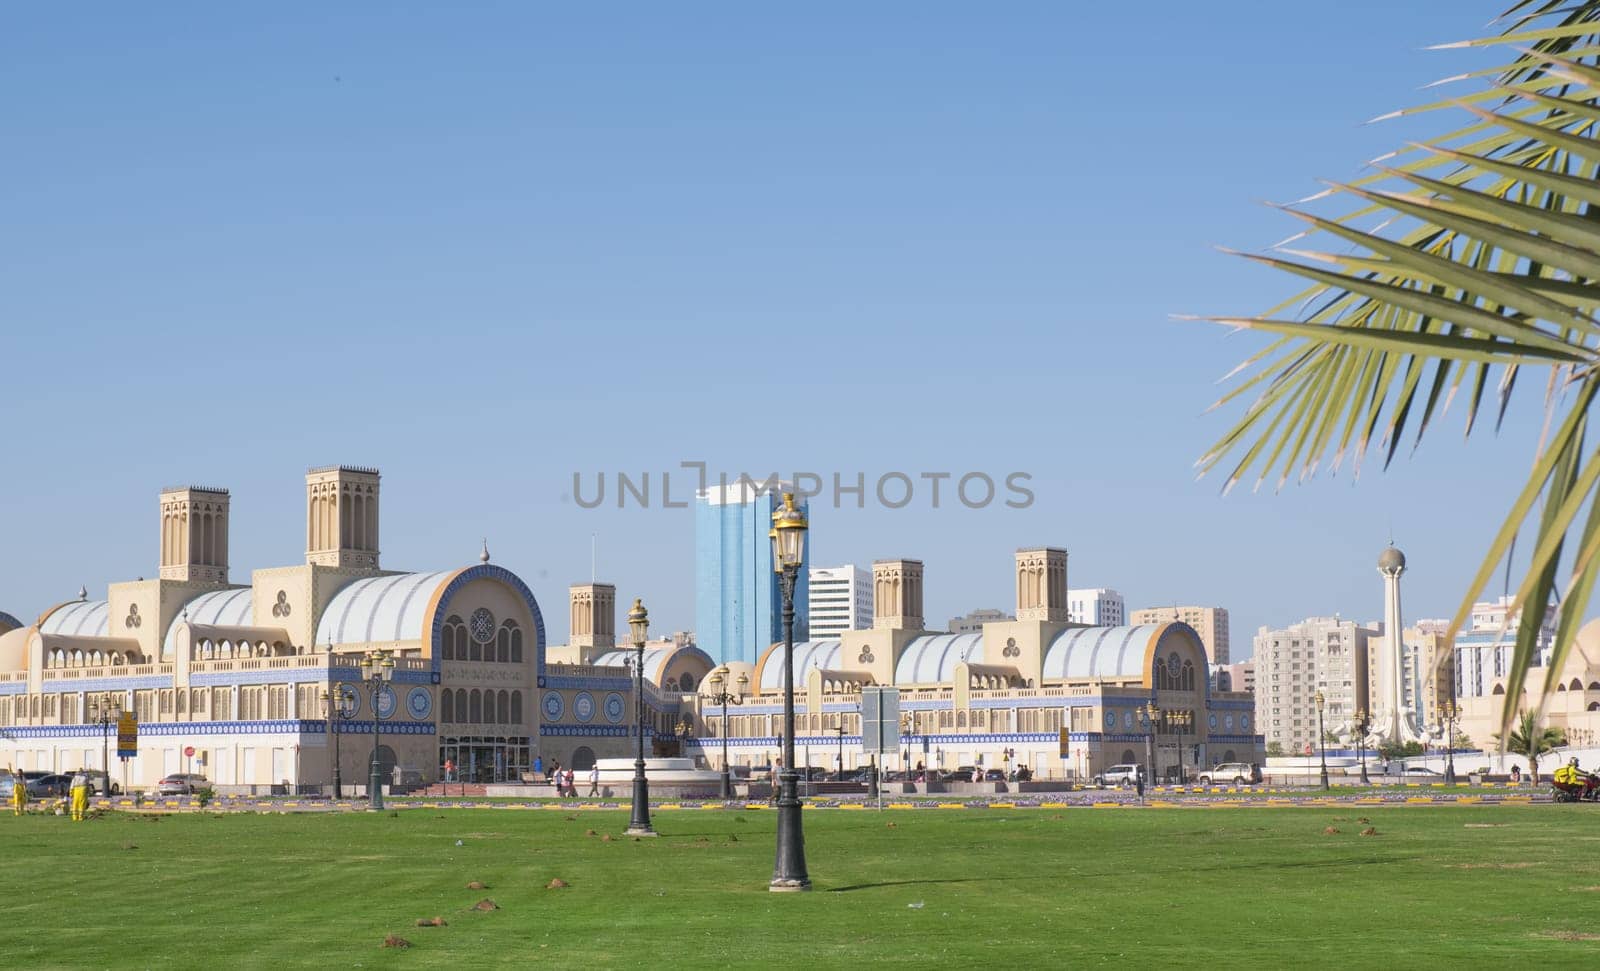 Sharjah, UAE, February 14, 2023: Blue Souk or Central Market is located in the center of Sharjah city in the United Arab Emirates or UAE